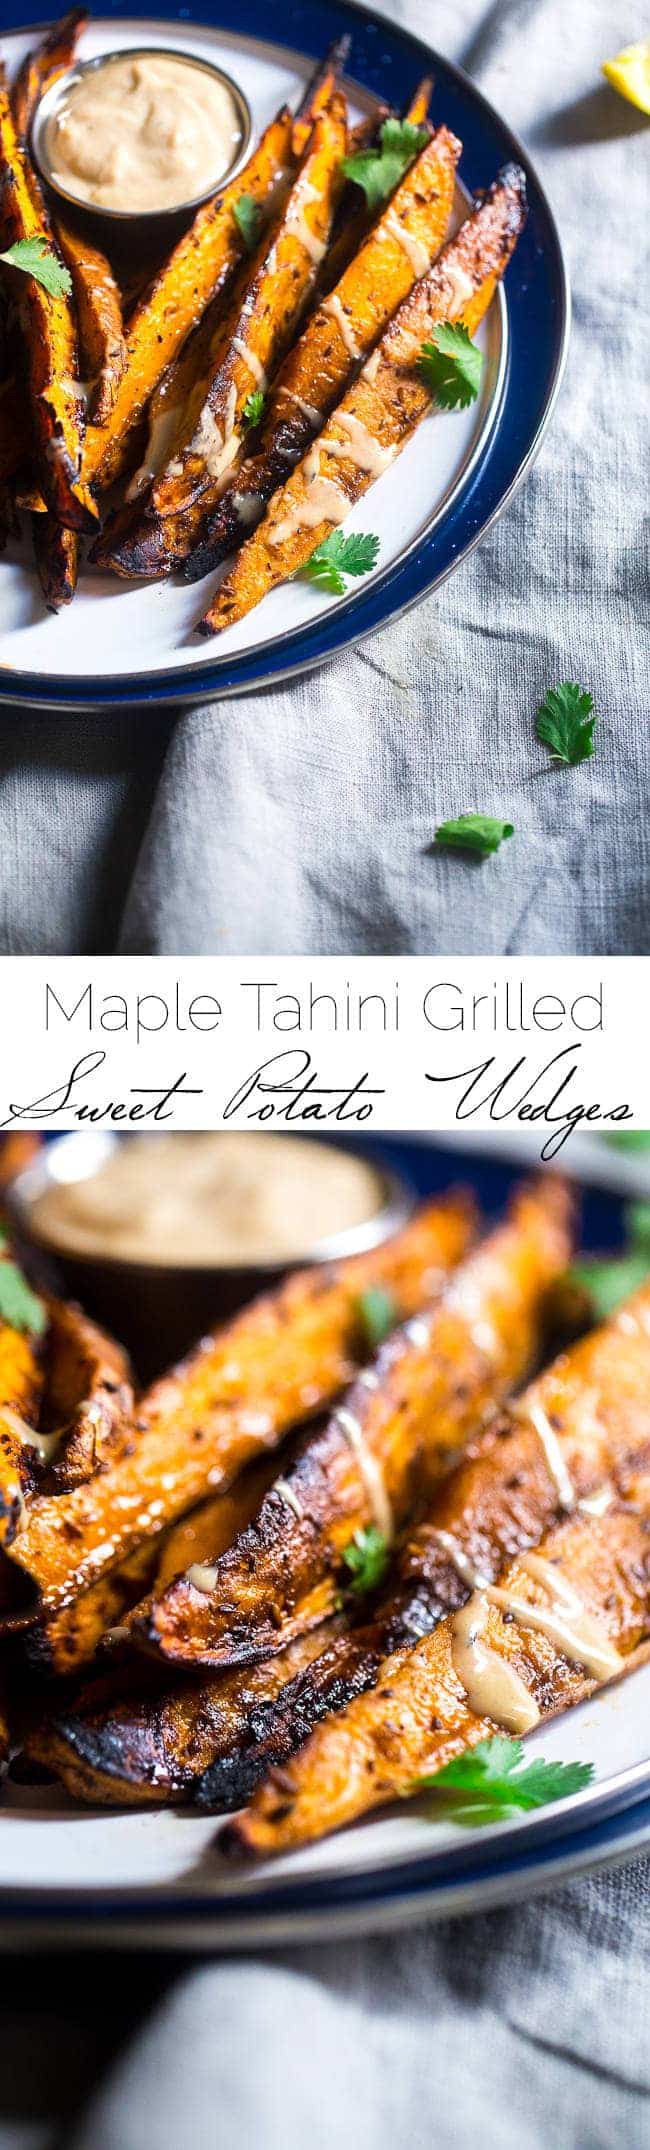 Maple Tahini Grilled Sweet Potatoes - Grilled sweet potatoes are dipped into a creamy, sweet dip of maple syrup and tahini for an easy, paleo and vegan friendly side dish. A perfect, healthy summer side dish! | FoodFaithfitness.com | @FoodFaithFit